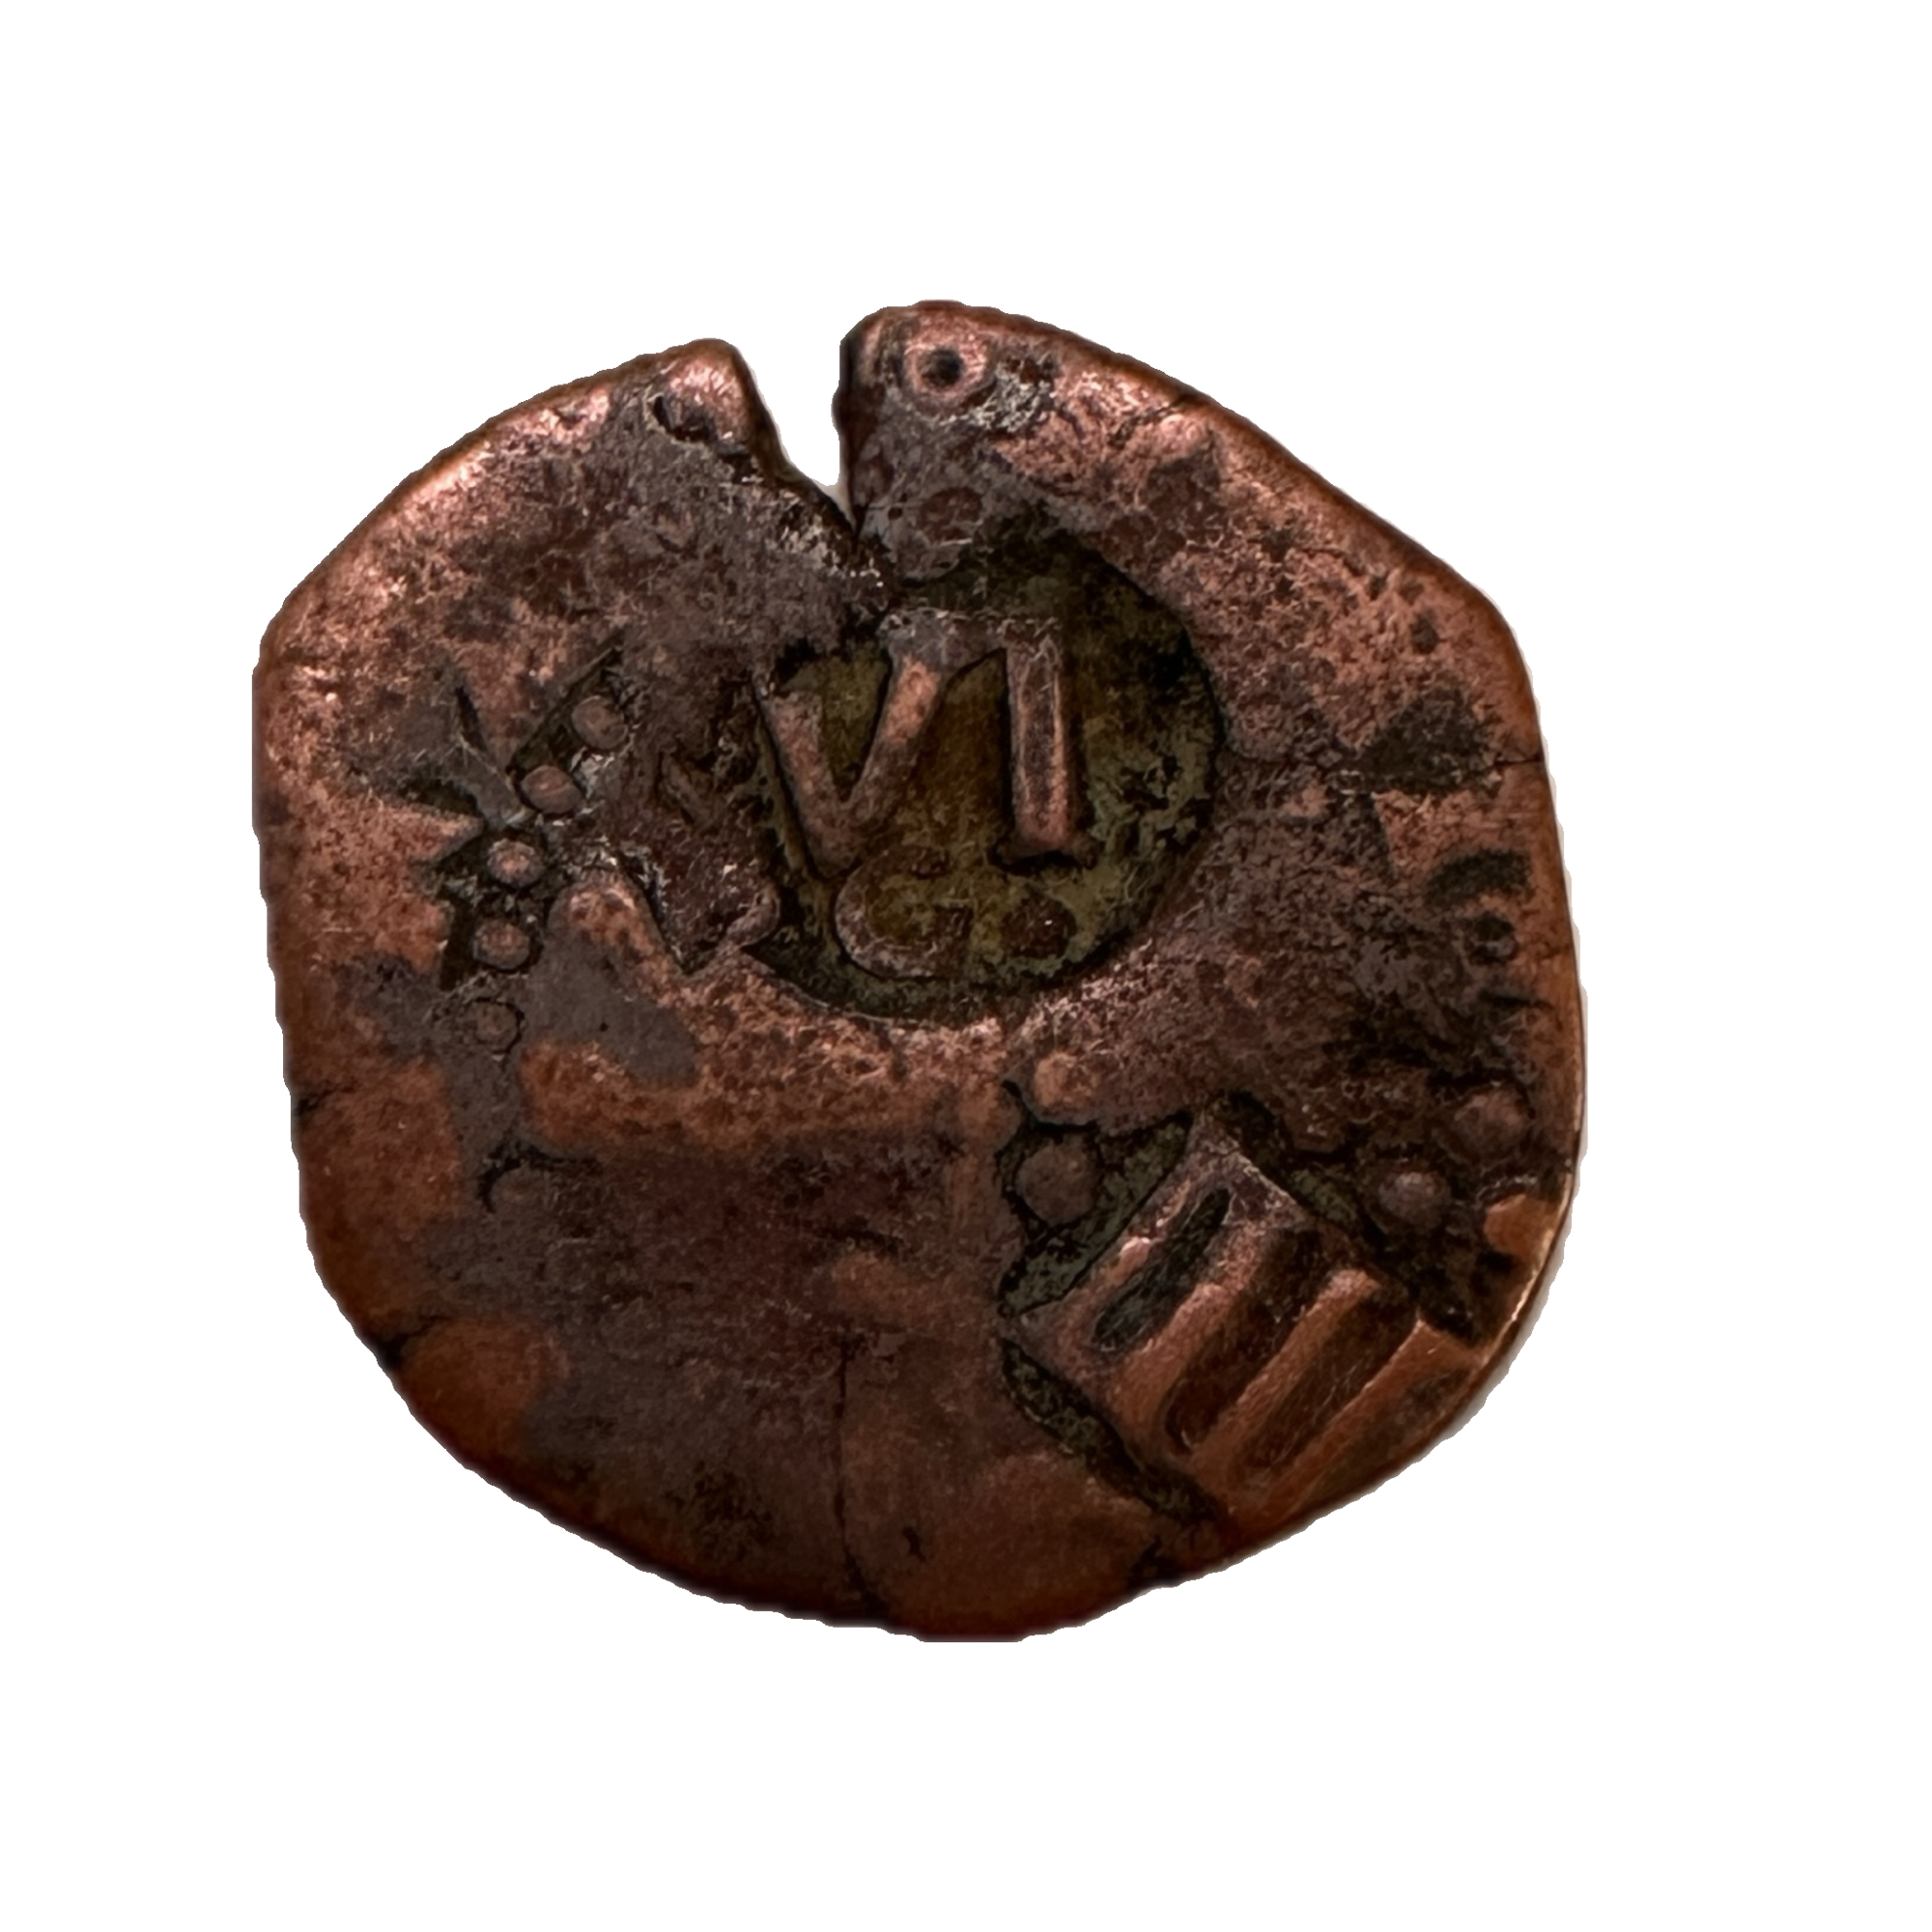 This Pirate coin from Spain has fantastic Roman numerals in high relief. The copper shipwreck coin is a true treasure